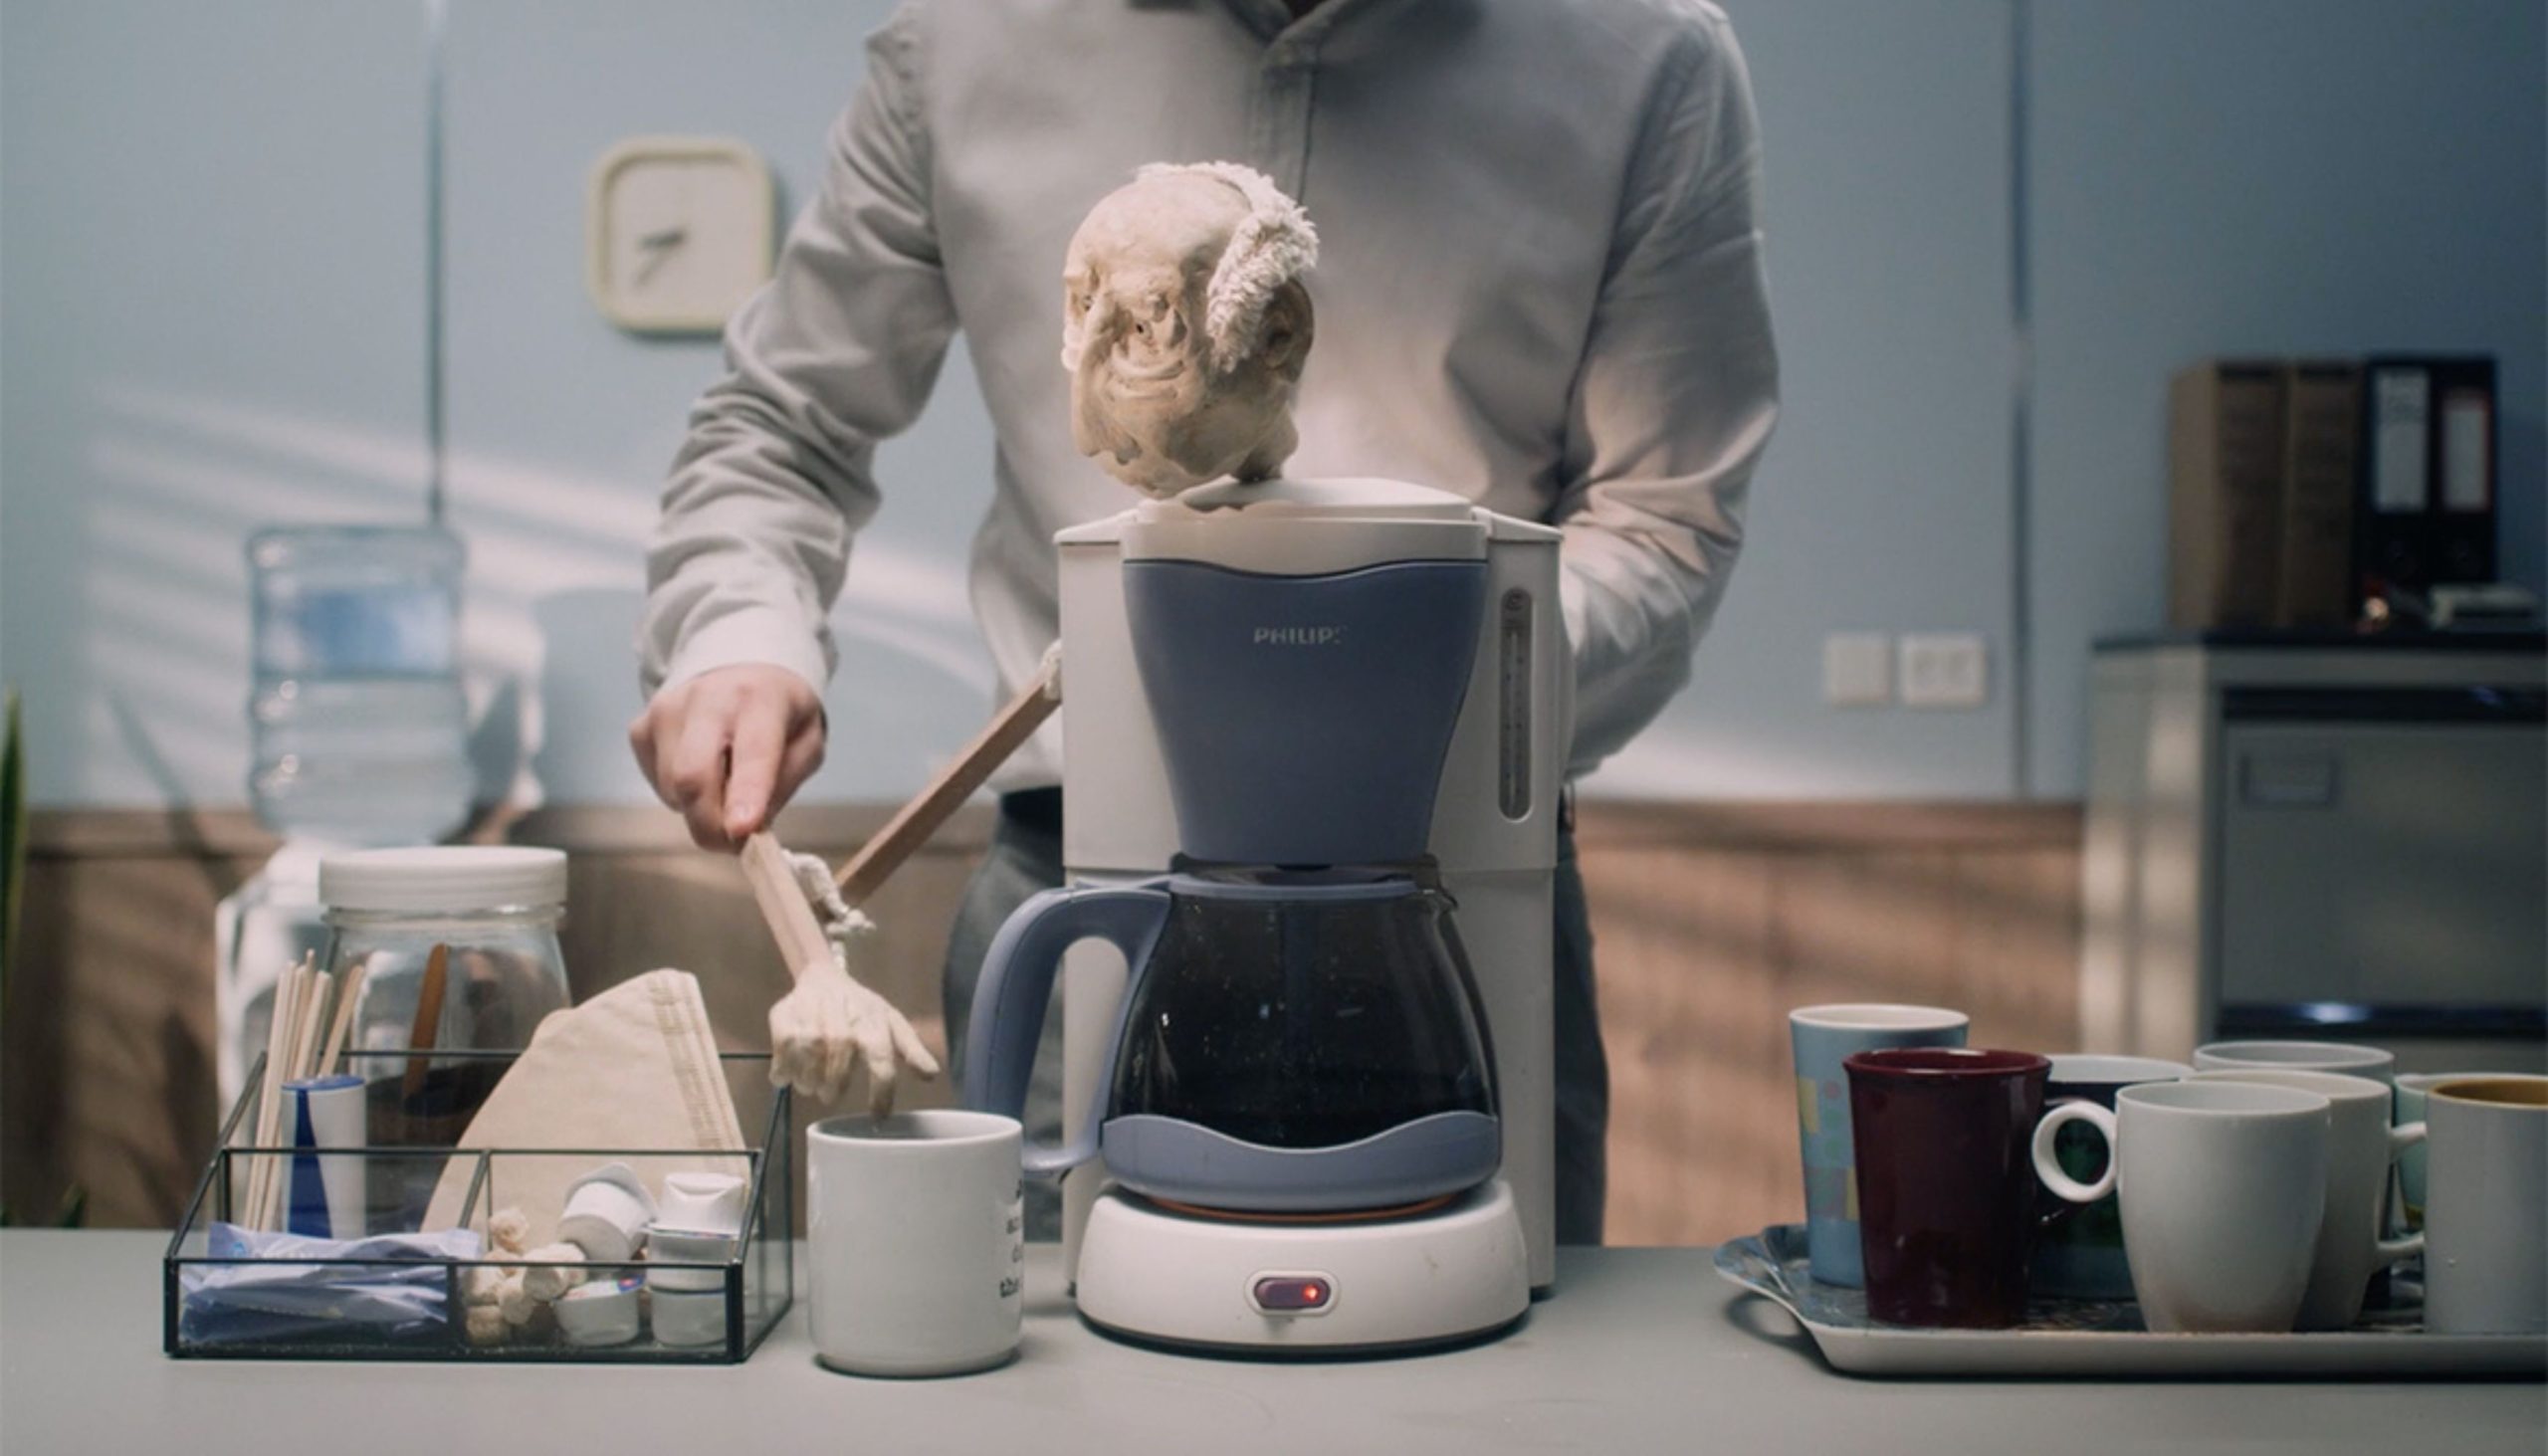 A weird, slightly sad, but rather funny video of Philip the ageing coffee maker